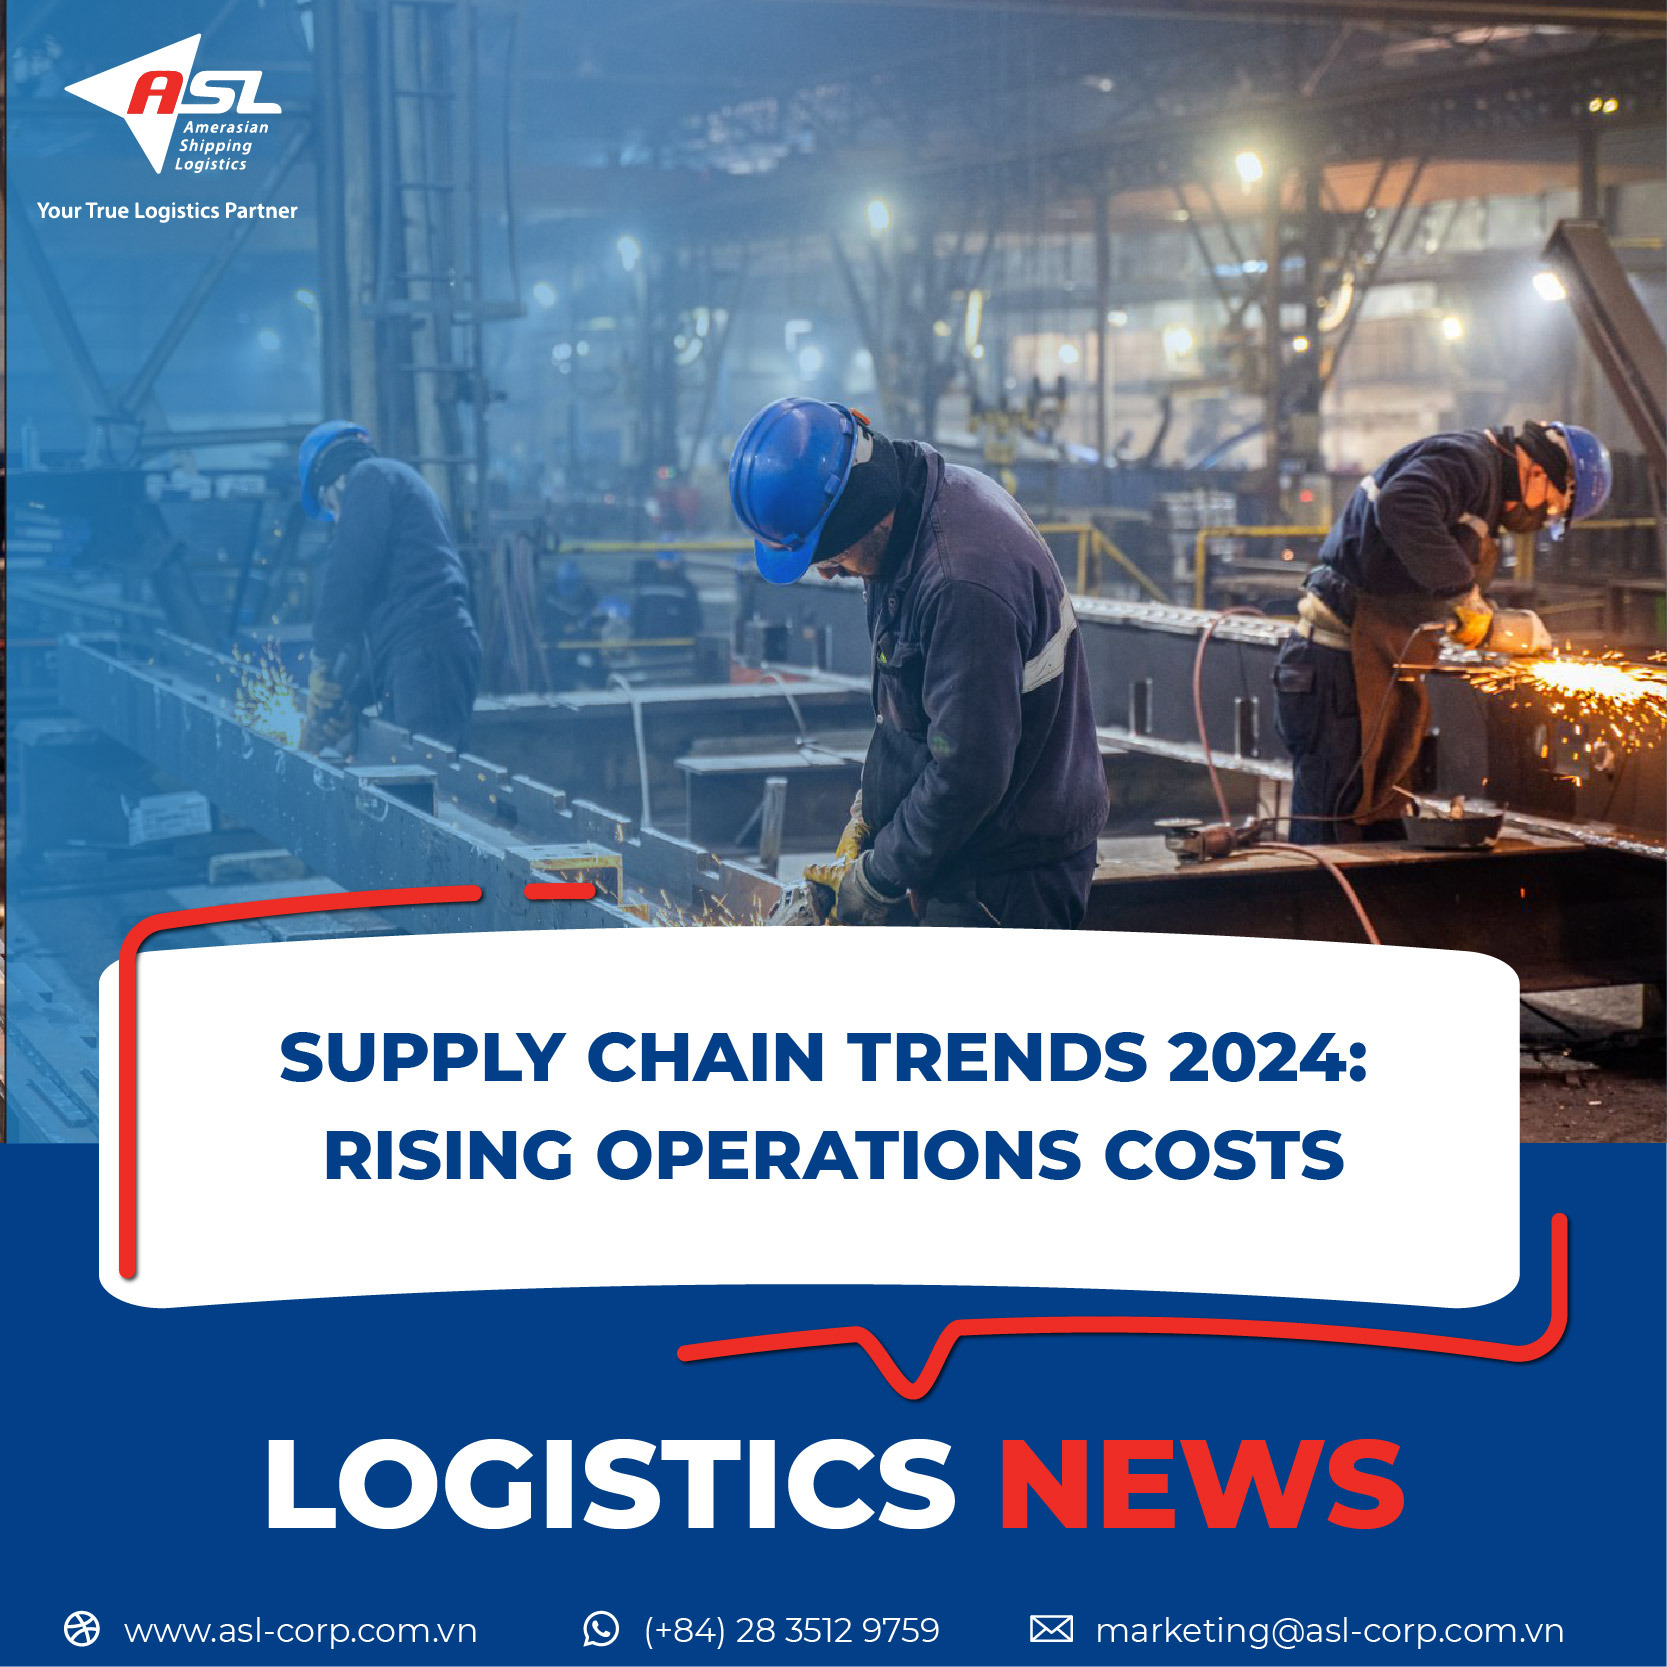 SUPPLY CHAIN TRENDS 2024 RISING OPERATIONS COSTS COVER 